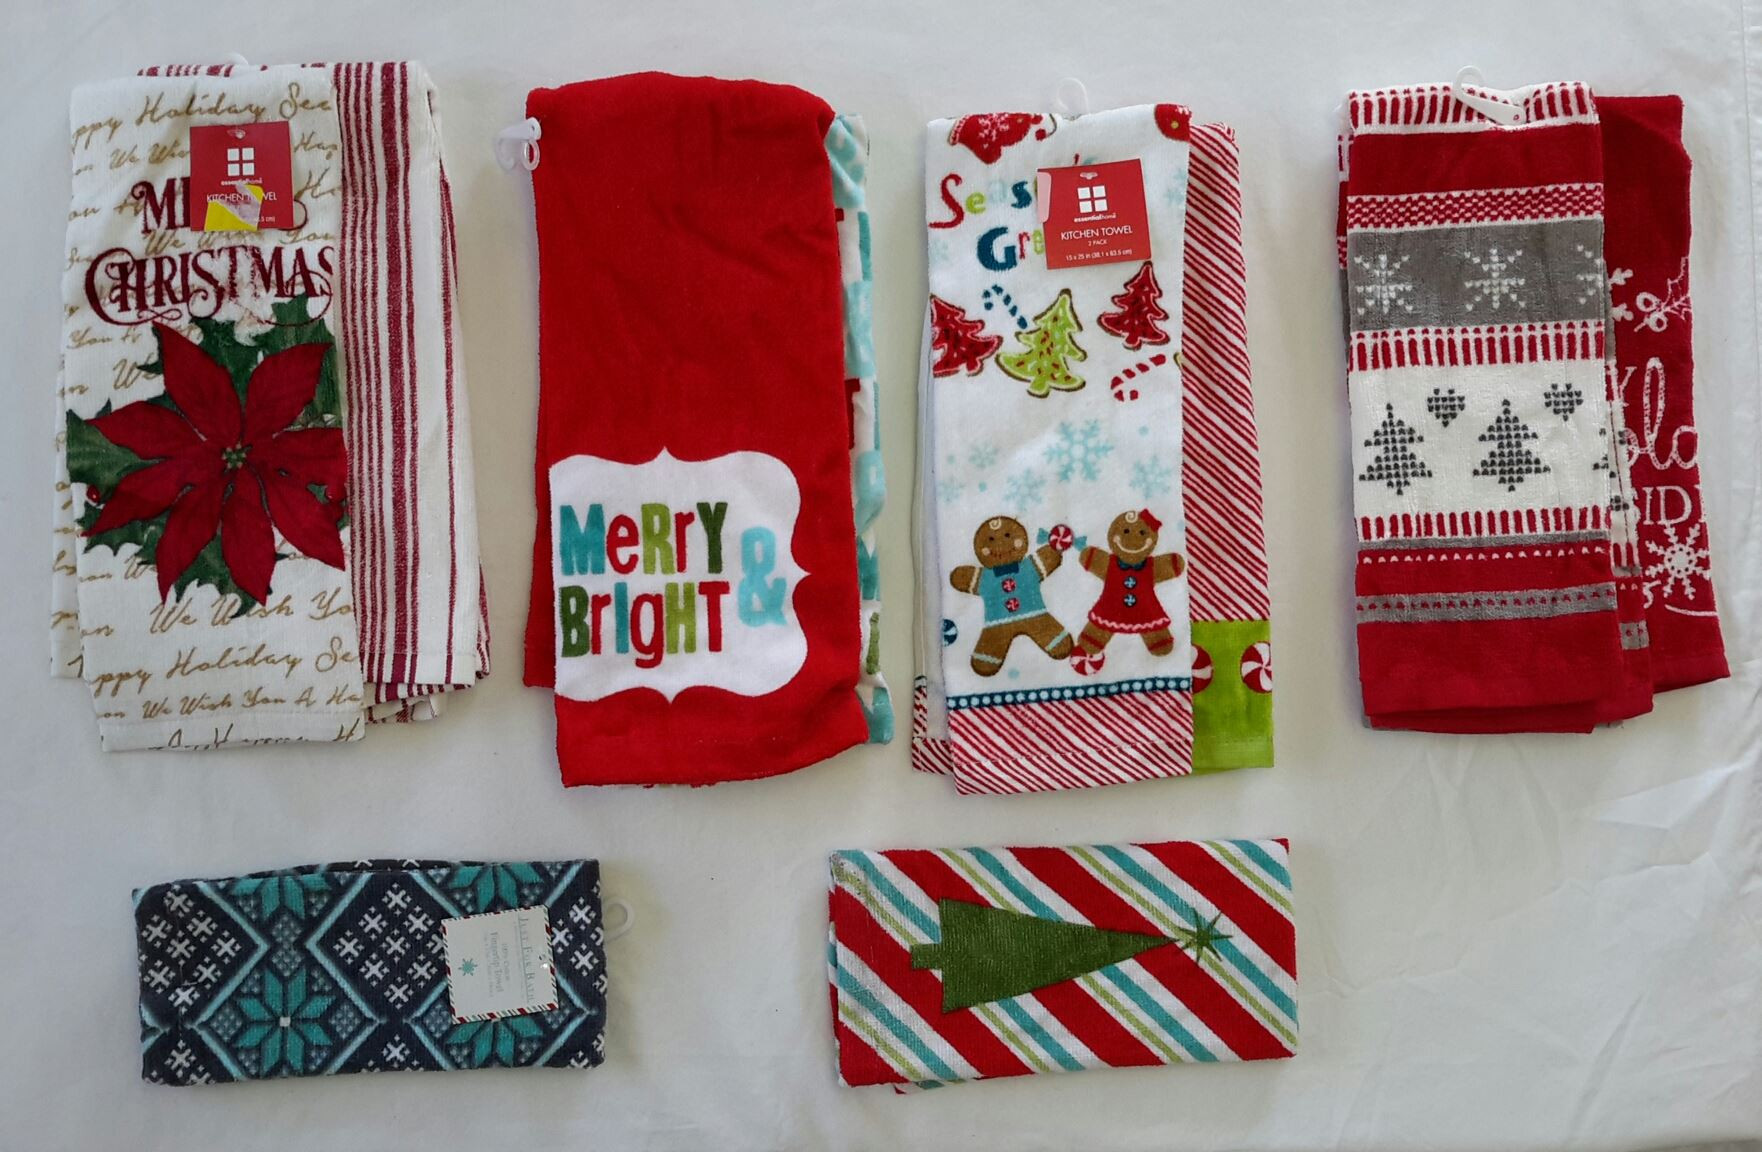 Christmas Kitchen Towels
 Wholesale Resale Lot of 22 Holiday Christmas Kitchen Bath